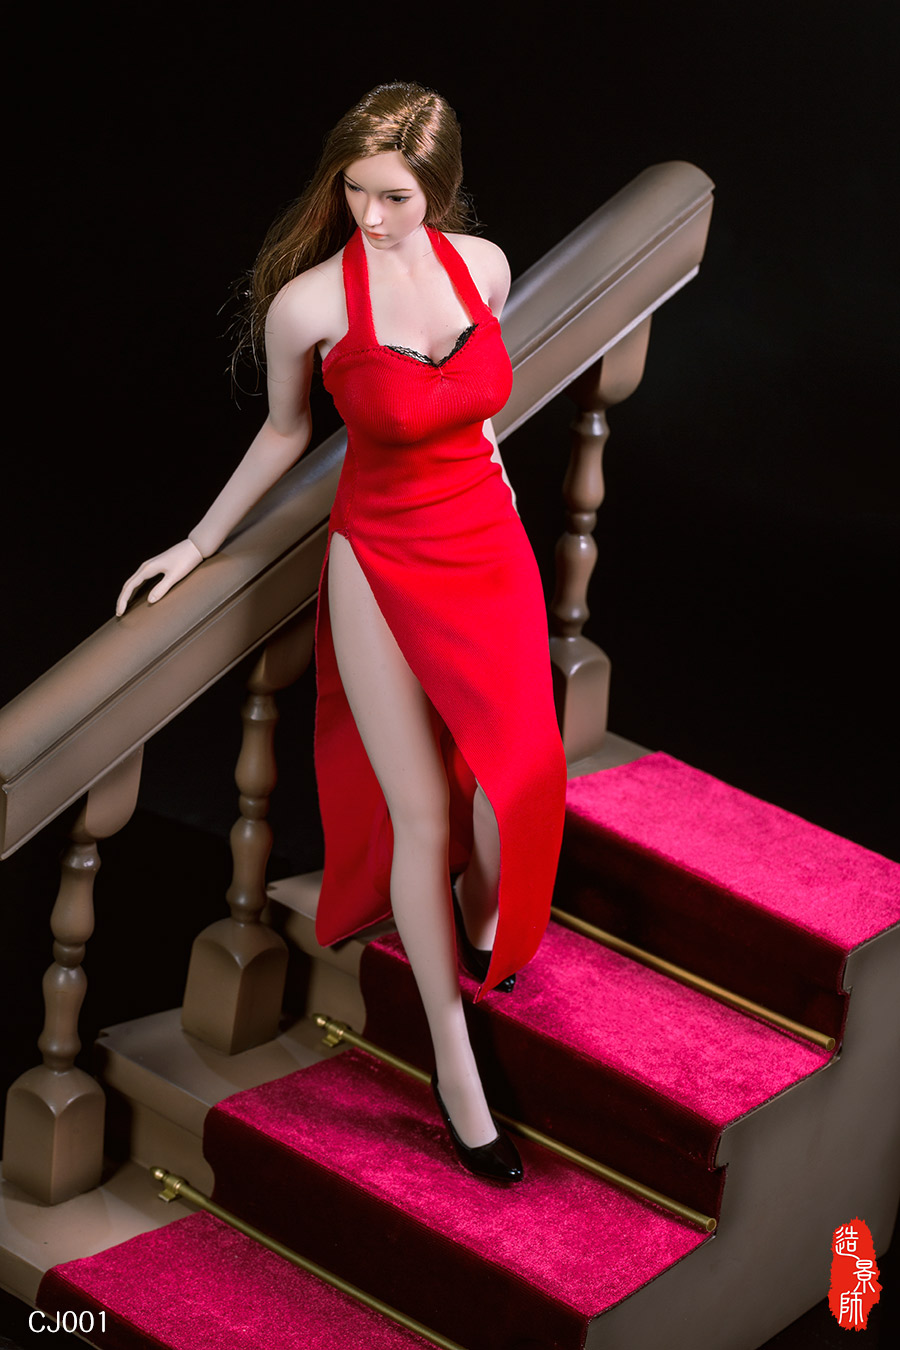 NEW PRODUCT: landscaper new product: 1/6 villa stair with armrest scene model (CJ001#)) - suitable for 12-inch doll model 1076